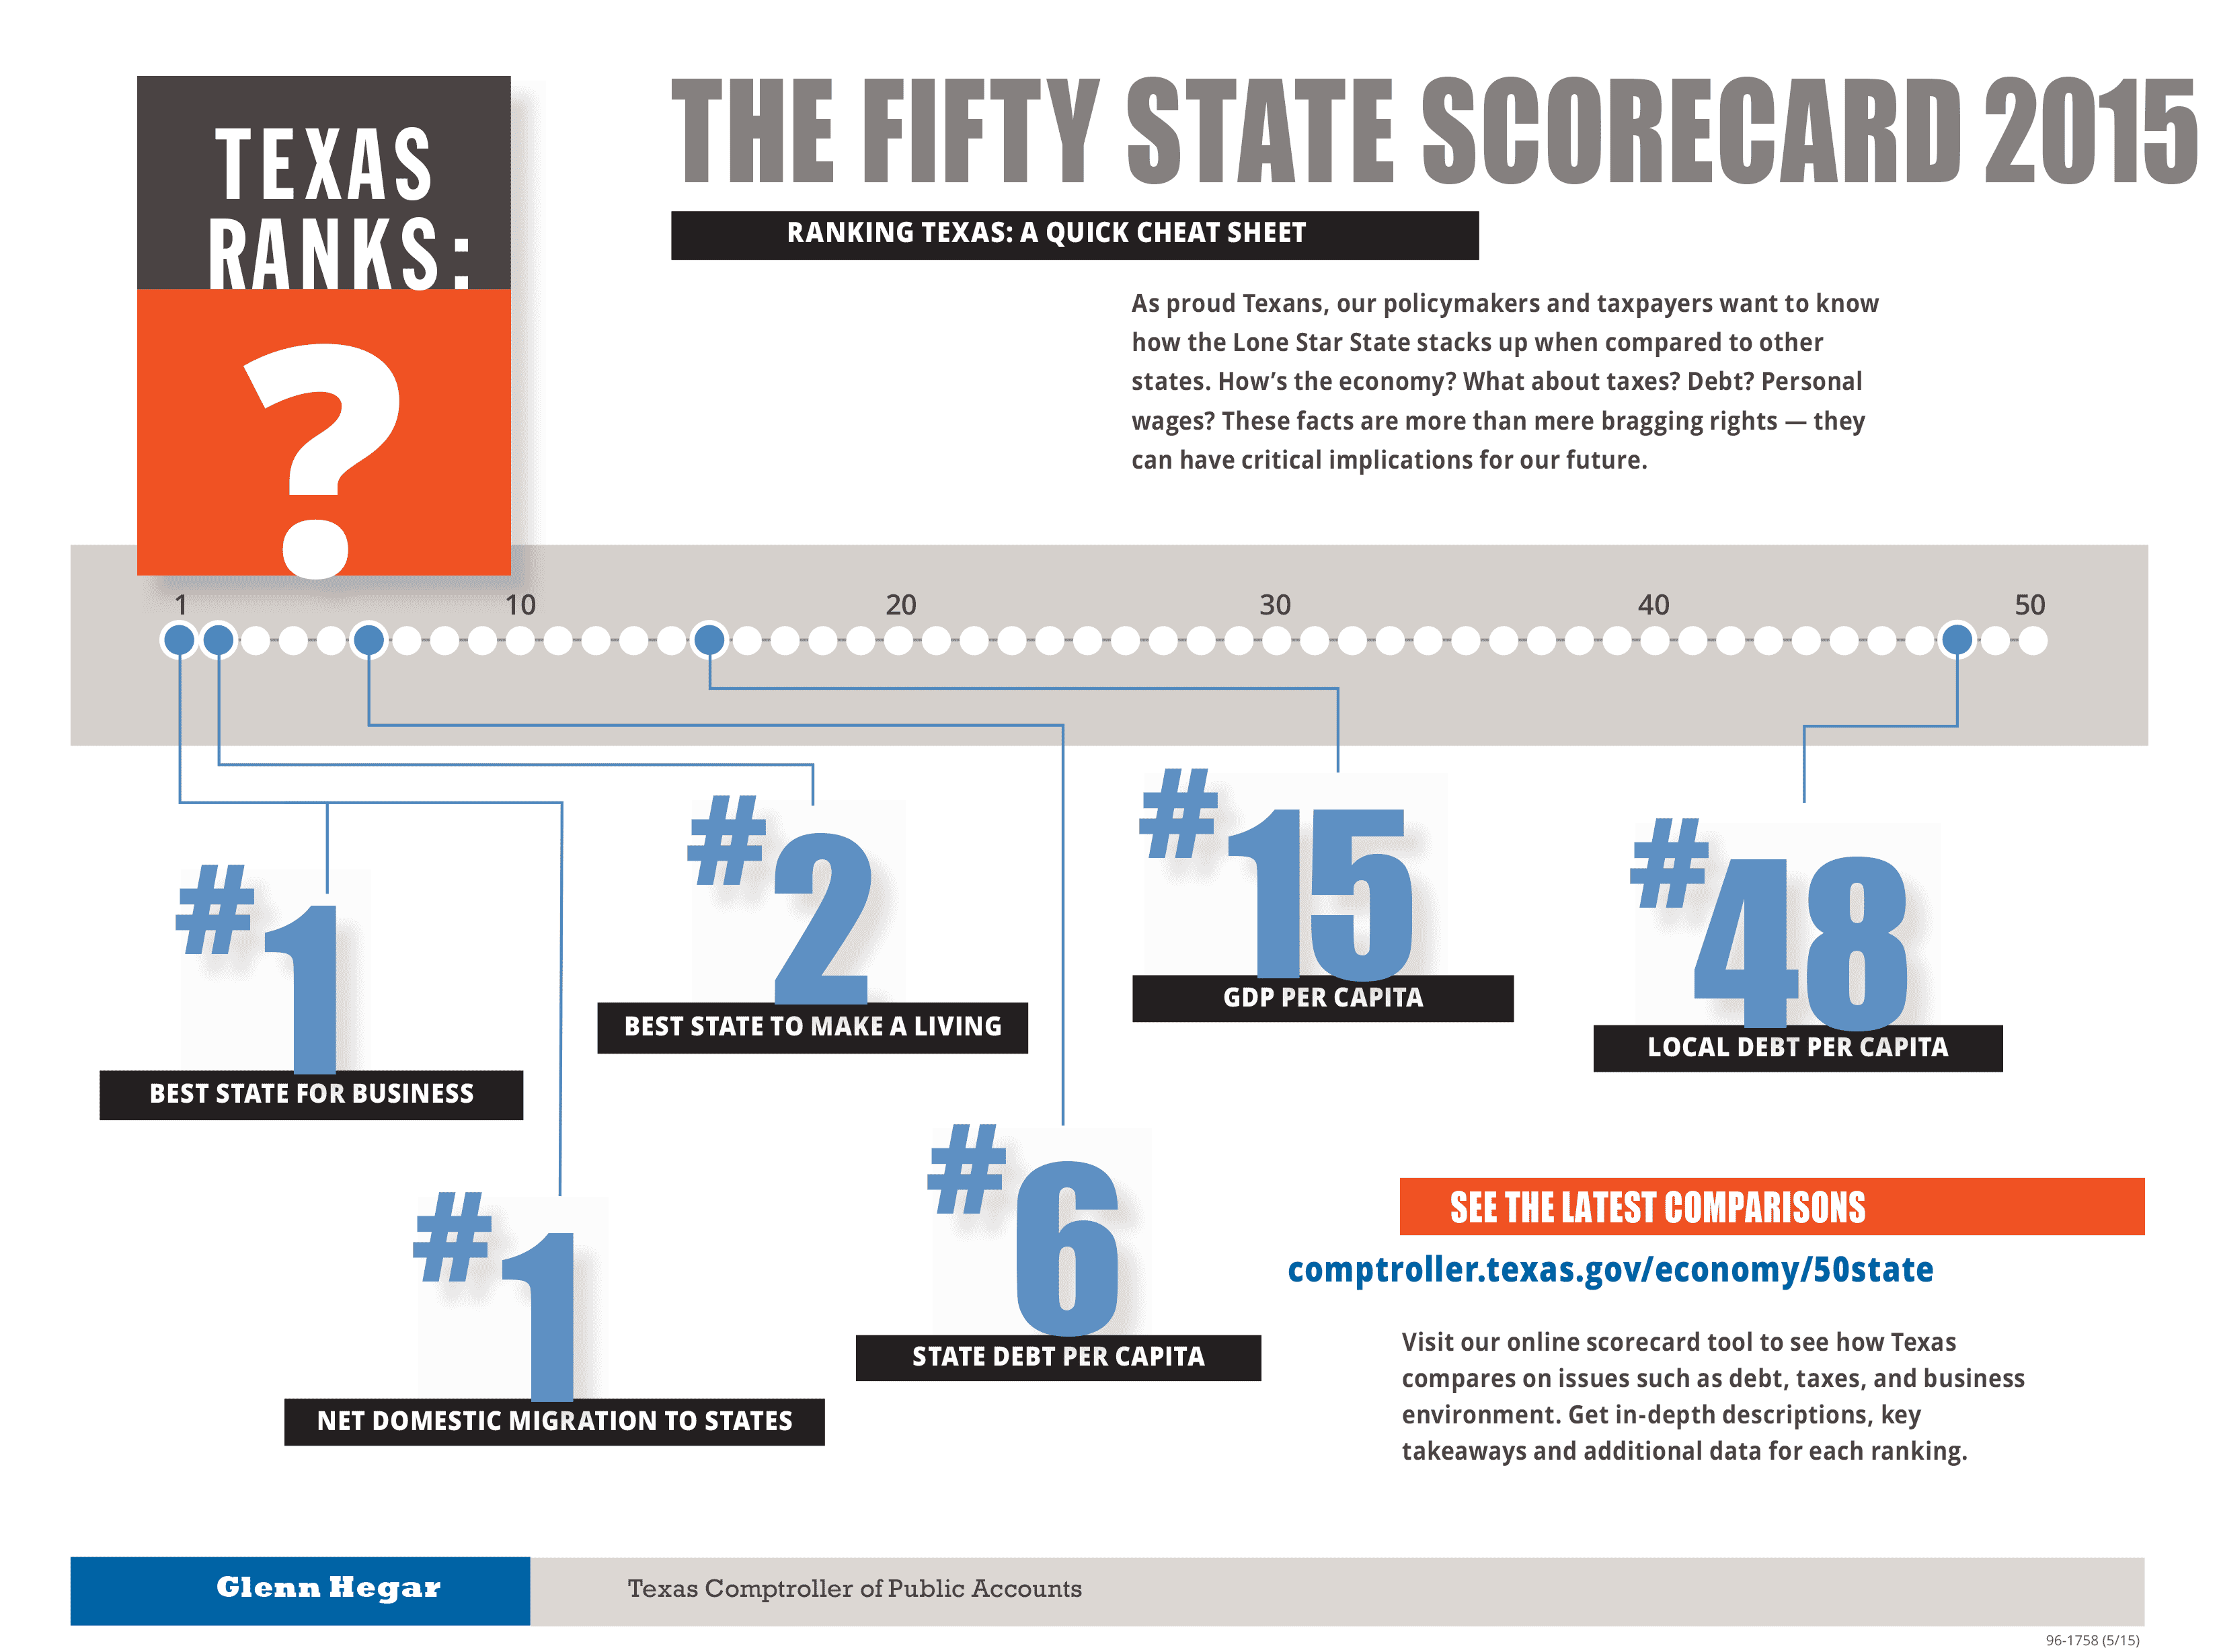 The Fifty State Scoreboard infographic circa 2015